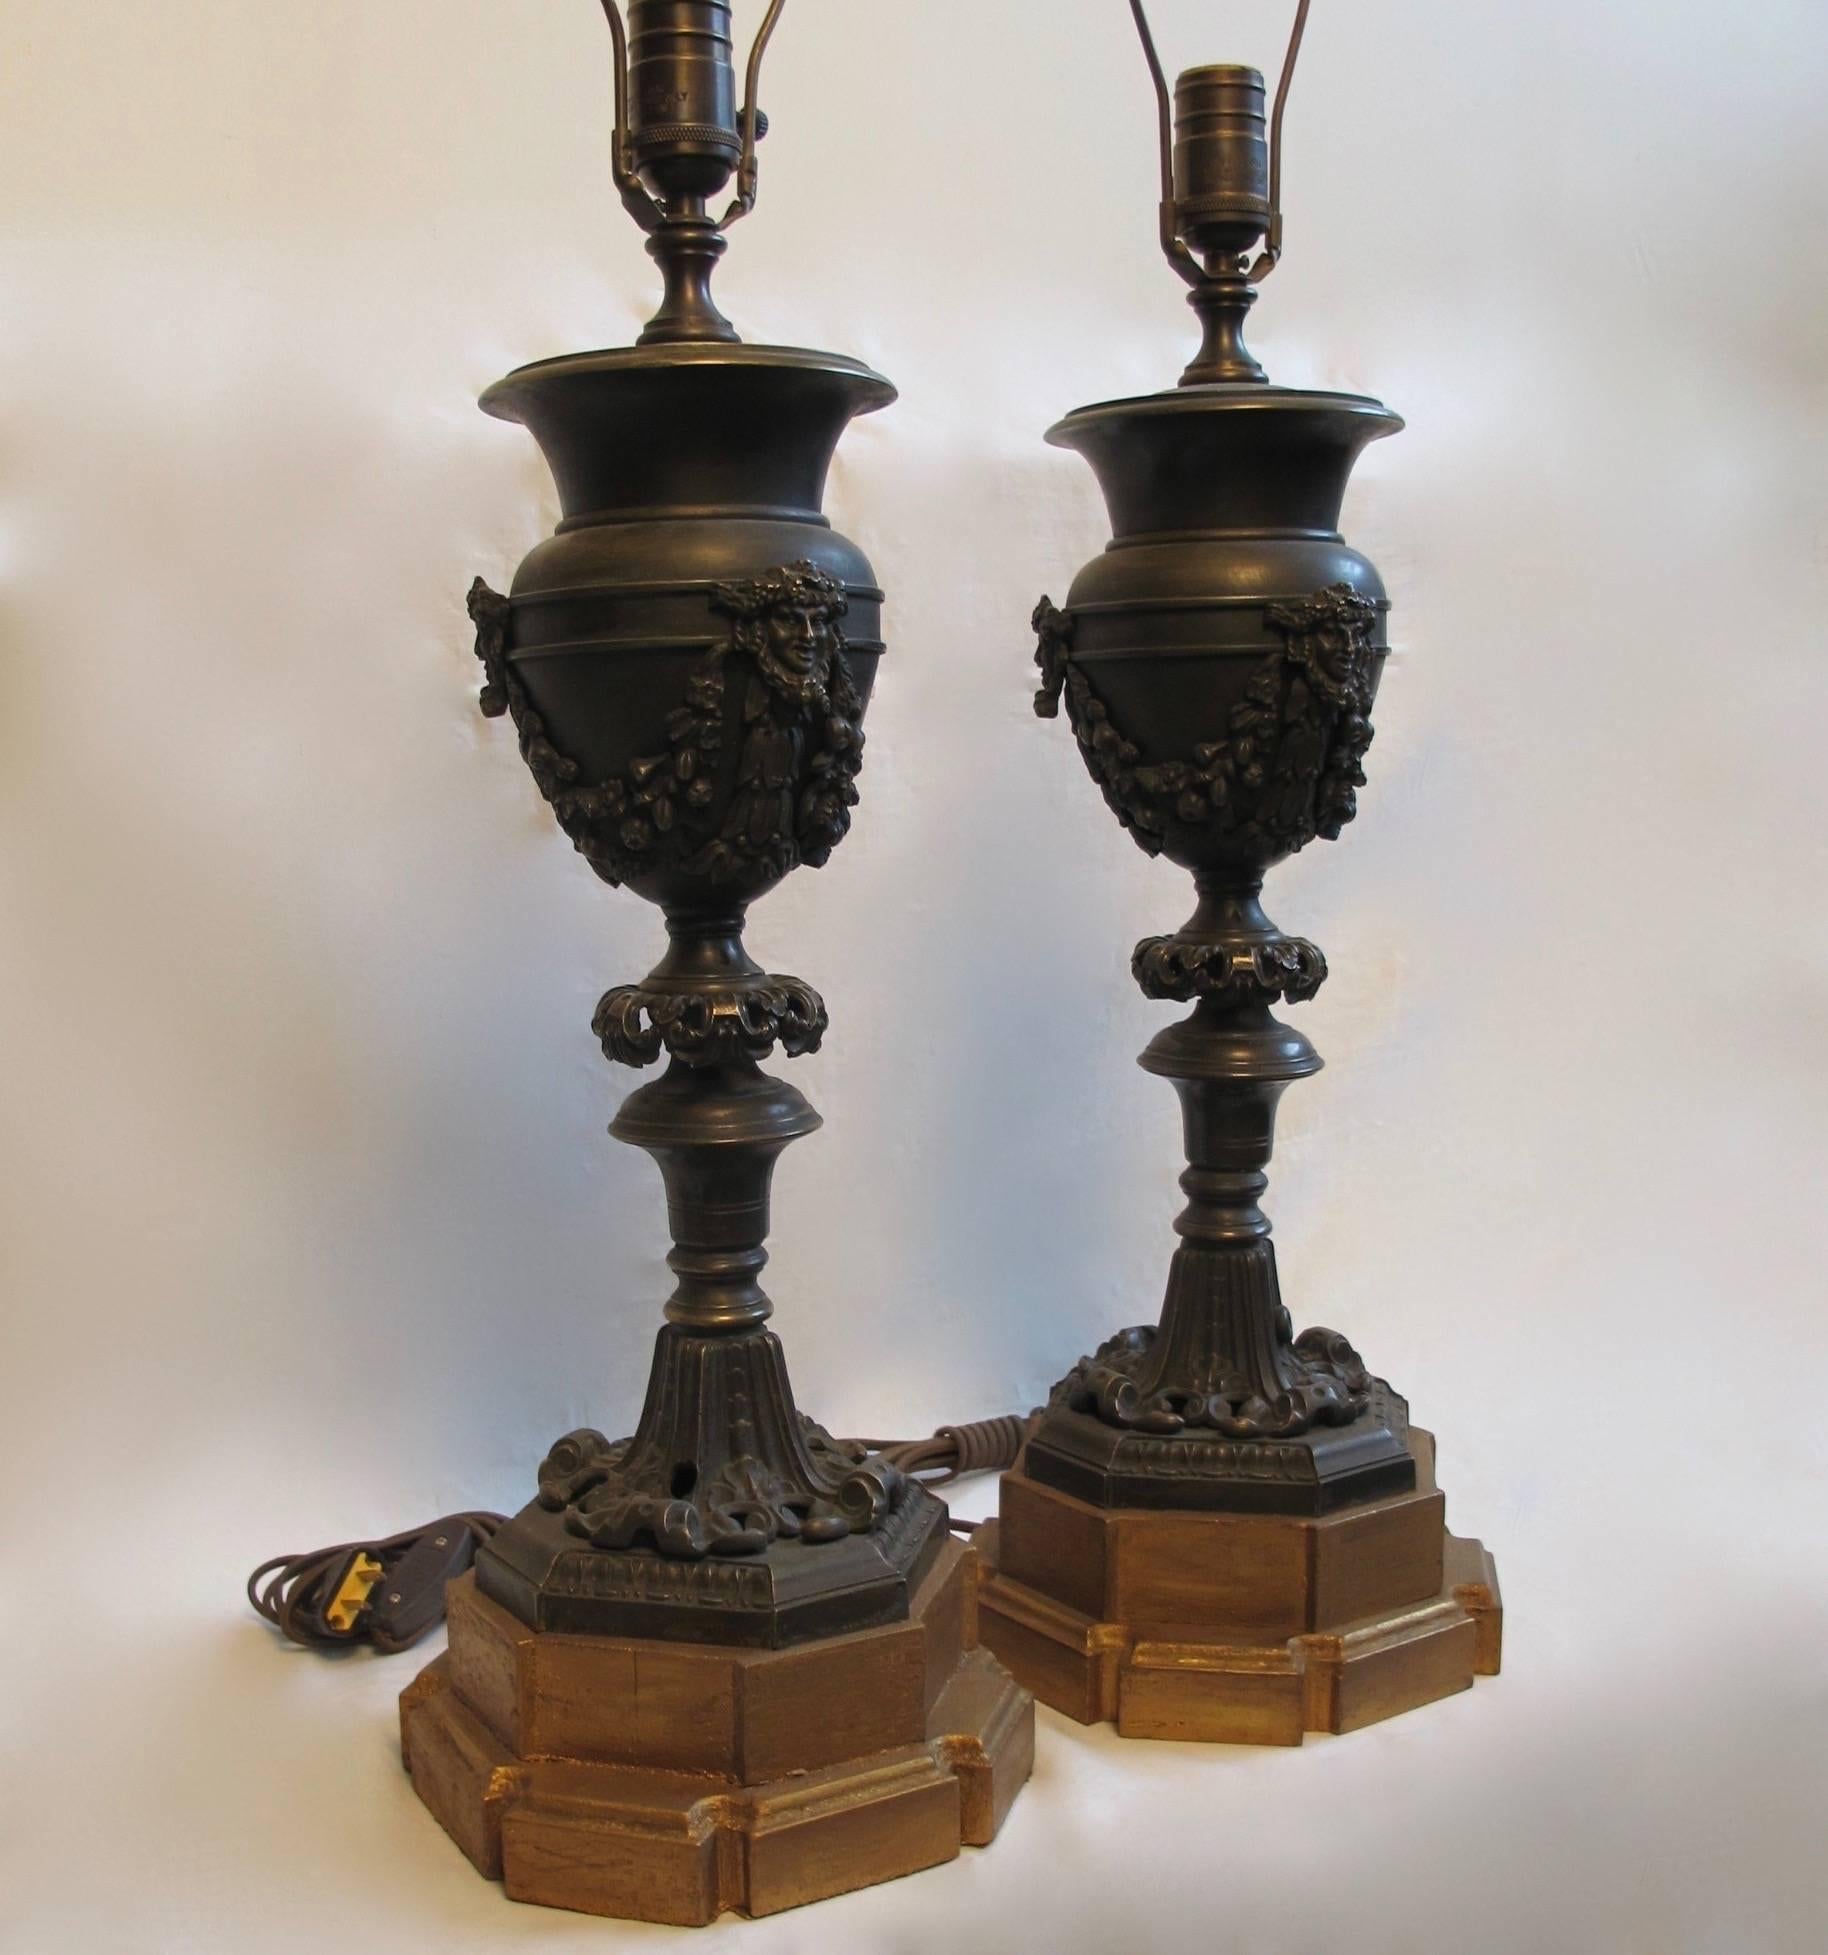 A fine quality pair of bronze urns (originally these would have sat atop a newel post) having masks and swags of fruit, now mounted on gilt wood bases and electrified as table lamps. 
Continental, circa 1870.